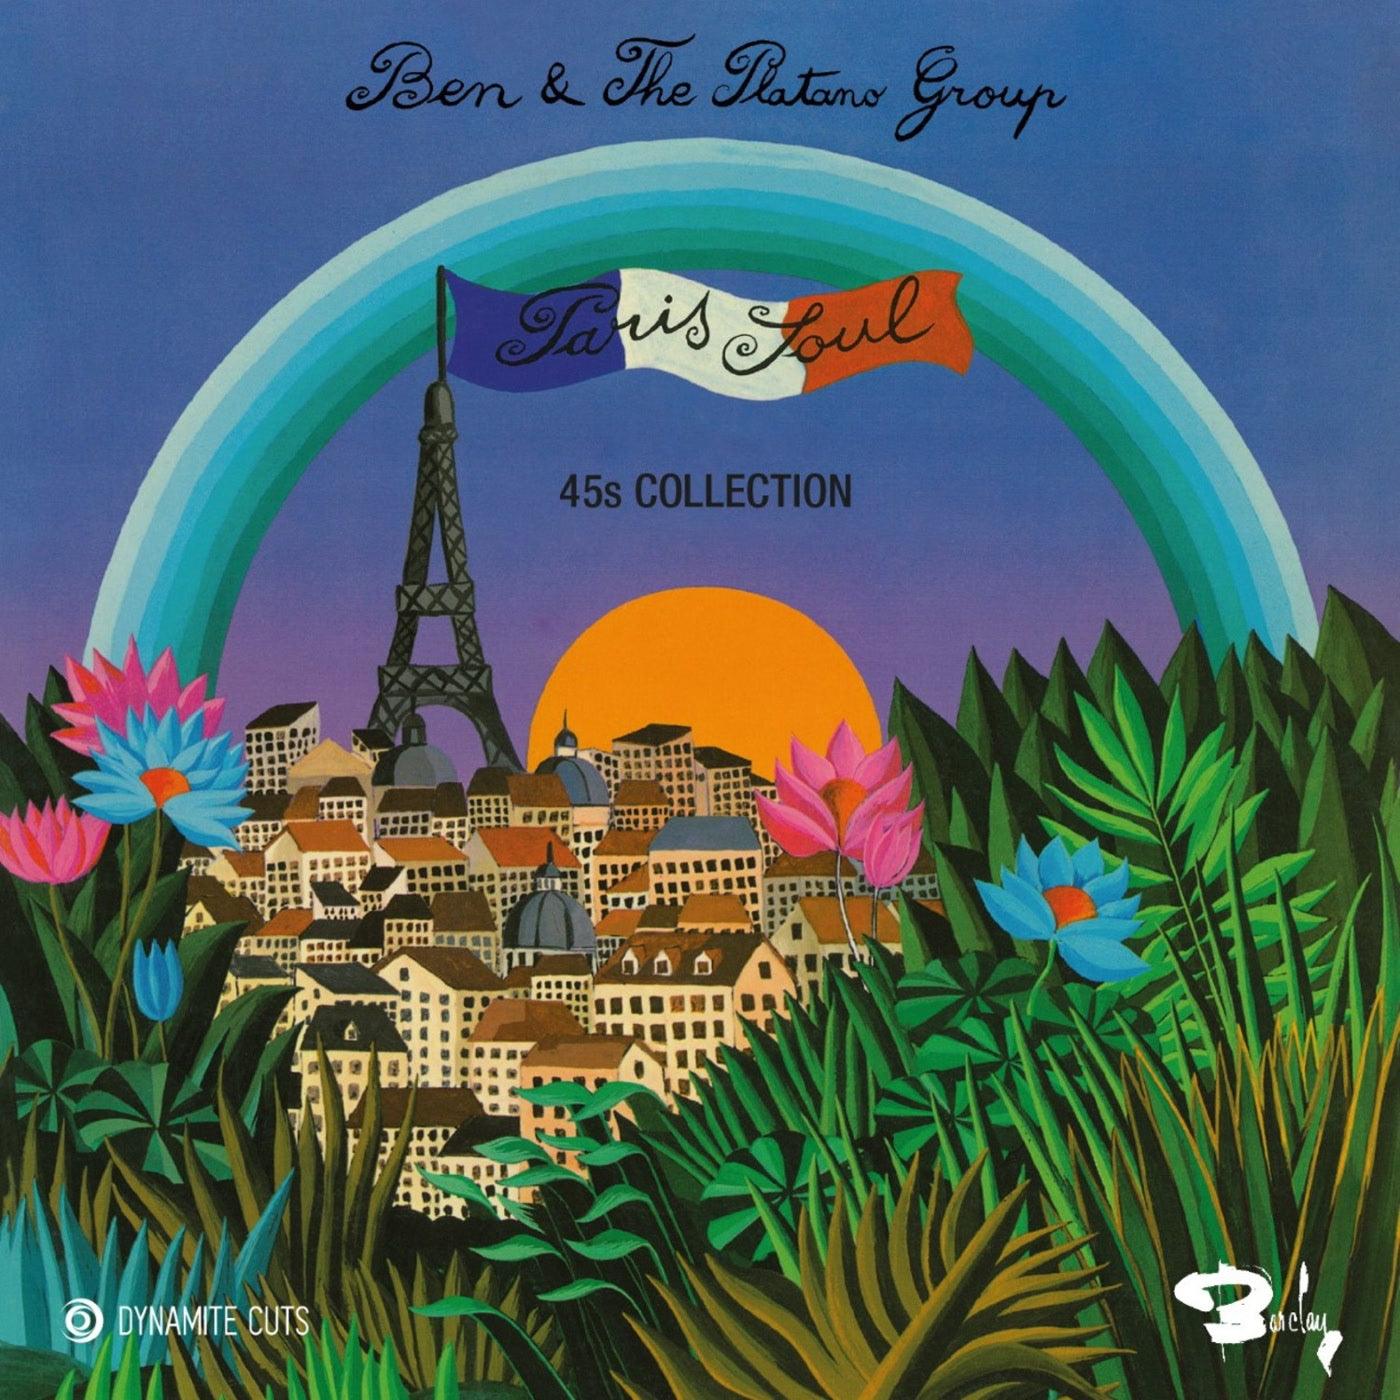 BEN AND THE PLATANO GROUP Paris Soul 45s Collection - Suit Yourself Music